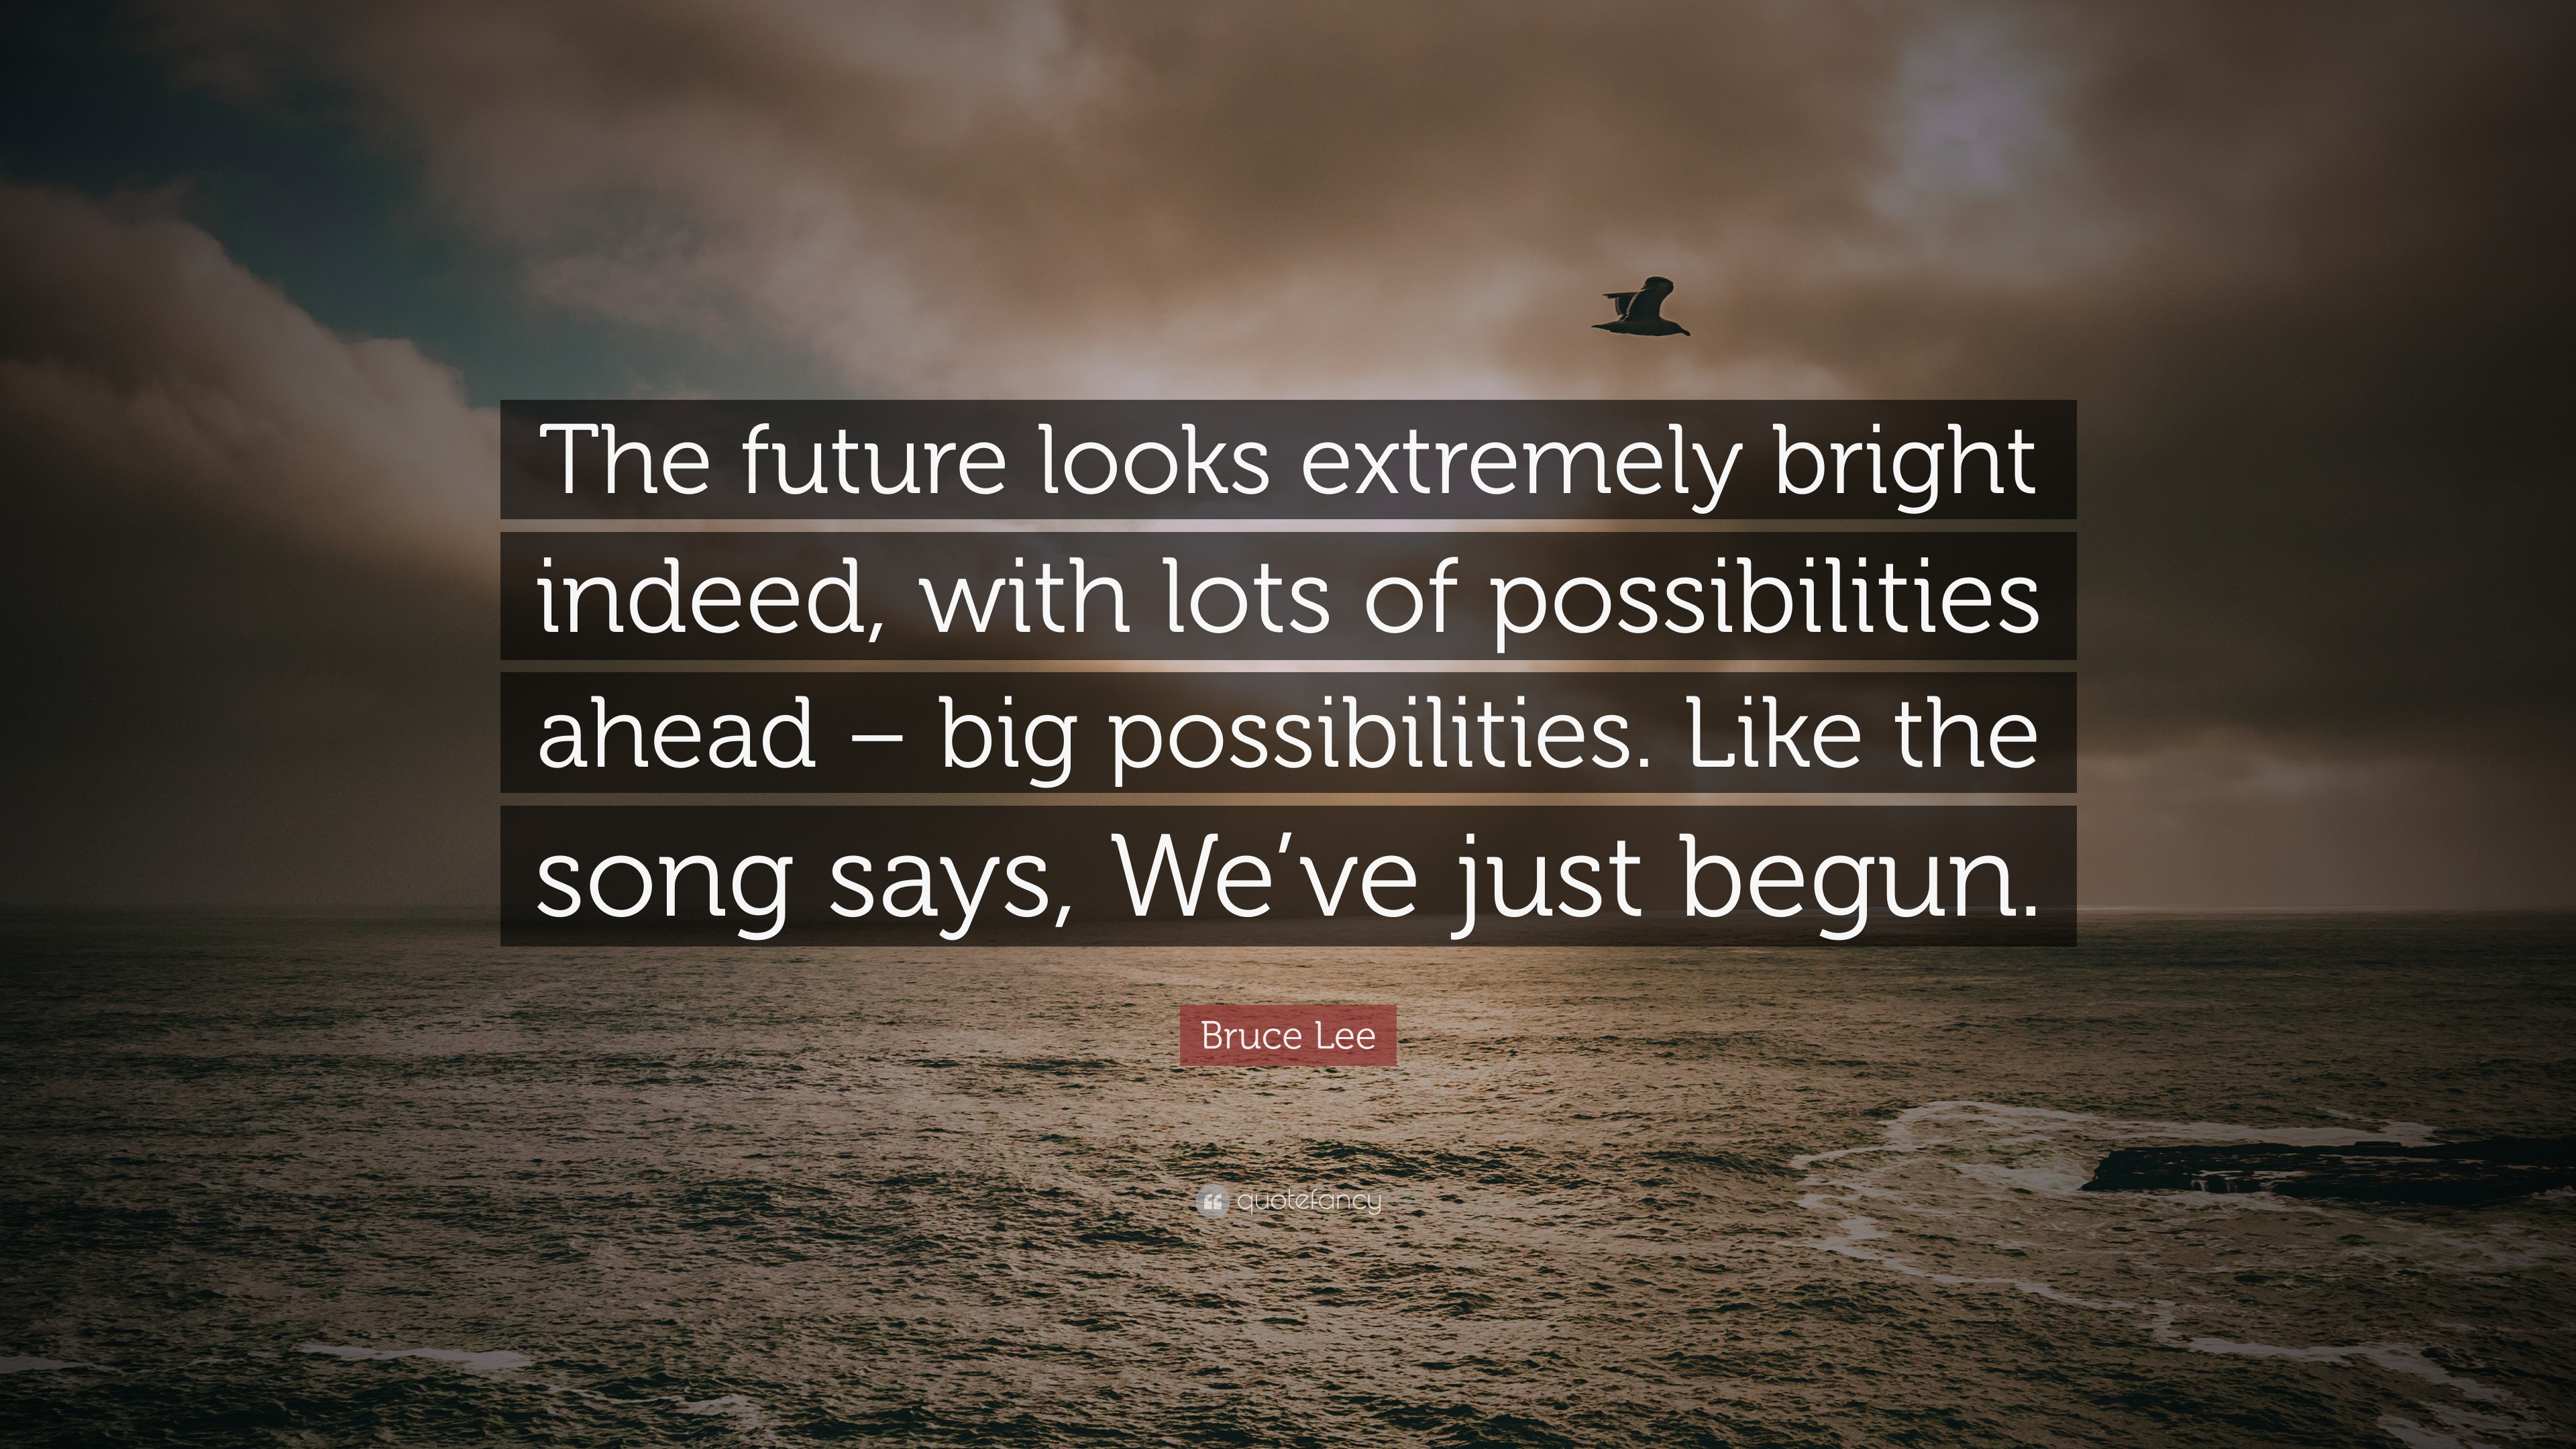 Bruce Lee Quote The Future Looks Extremely Bright Indeed With Lots Of Possibilities Ahead Big Possibilities Like The Song Says We V